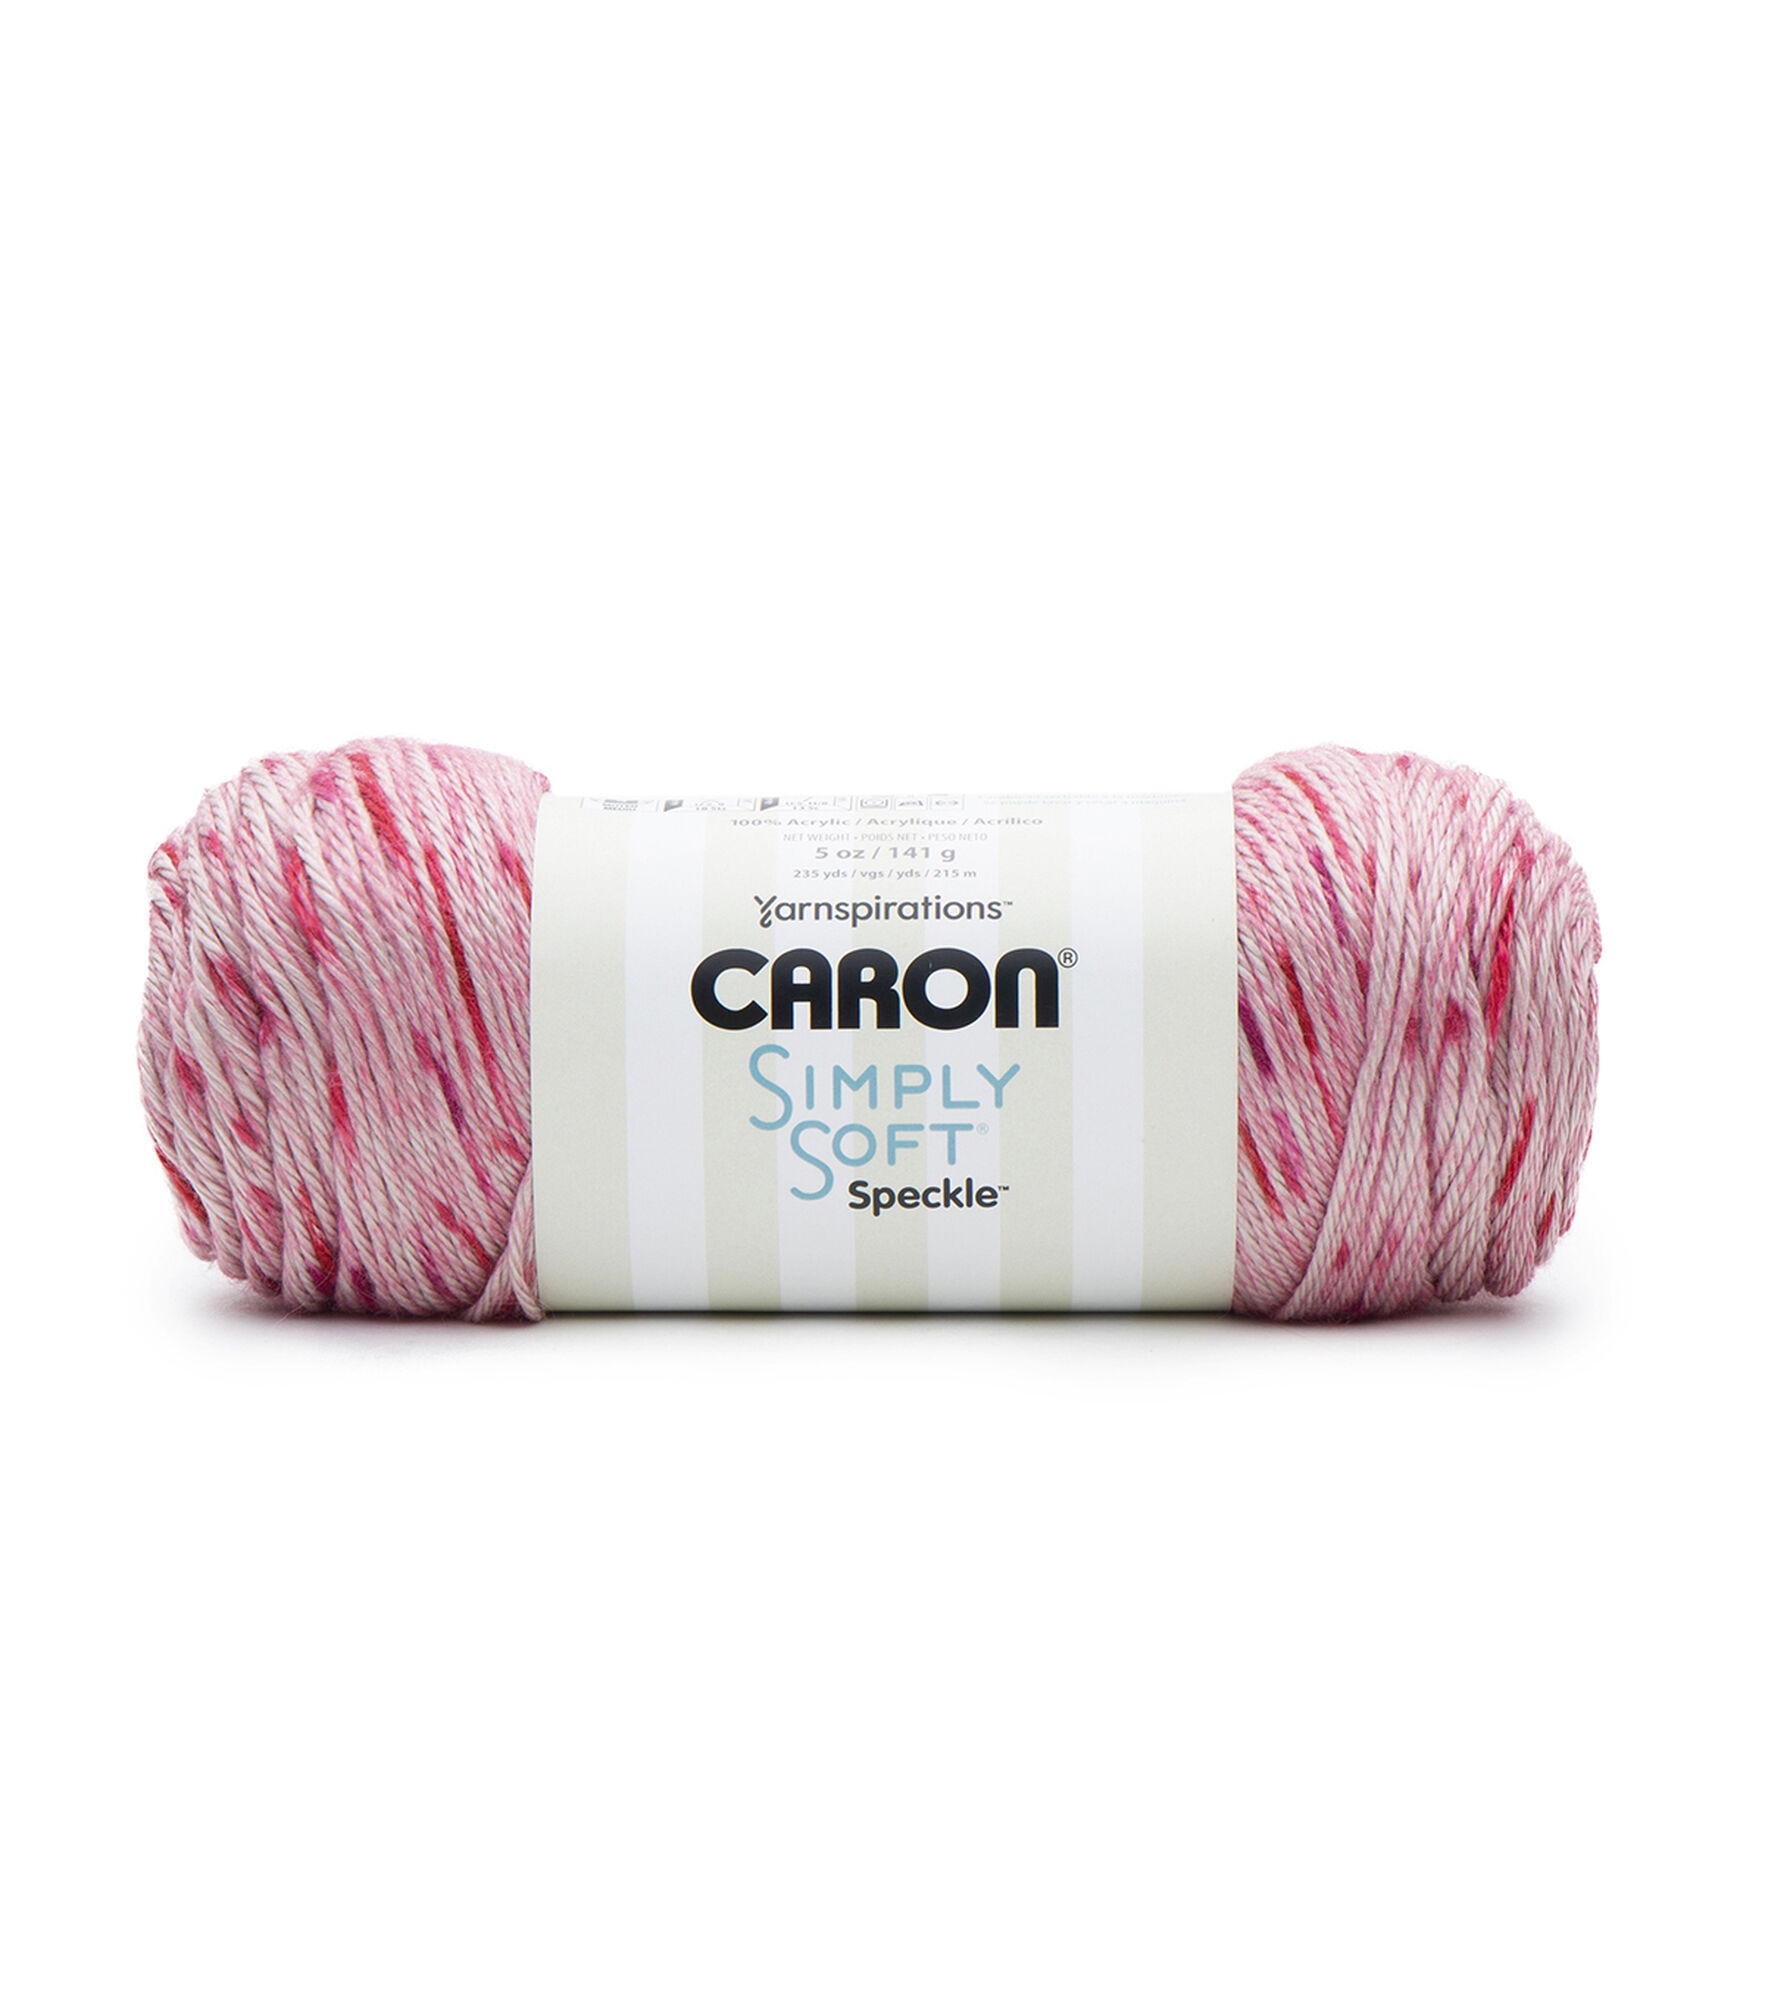 Caron Simply Soft Speckle 235yds Worsted Acrylic Yarn, Lipstick, hi-res